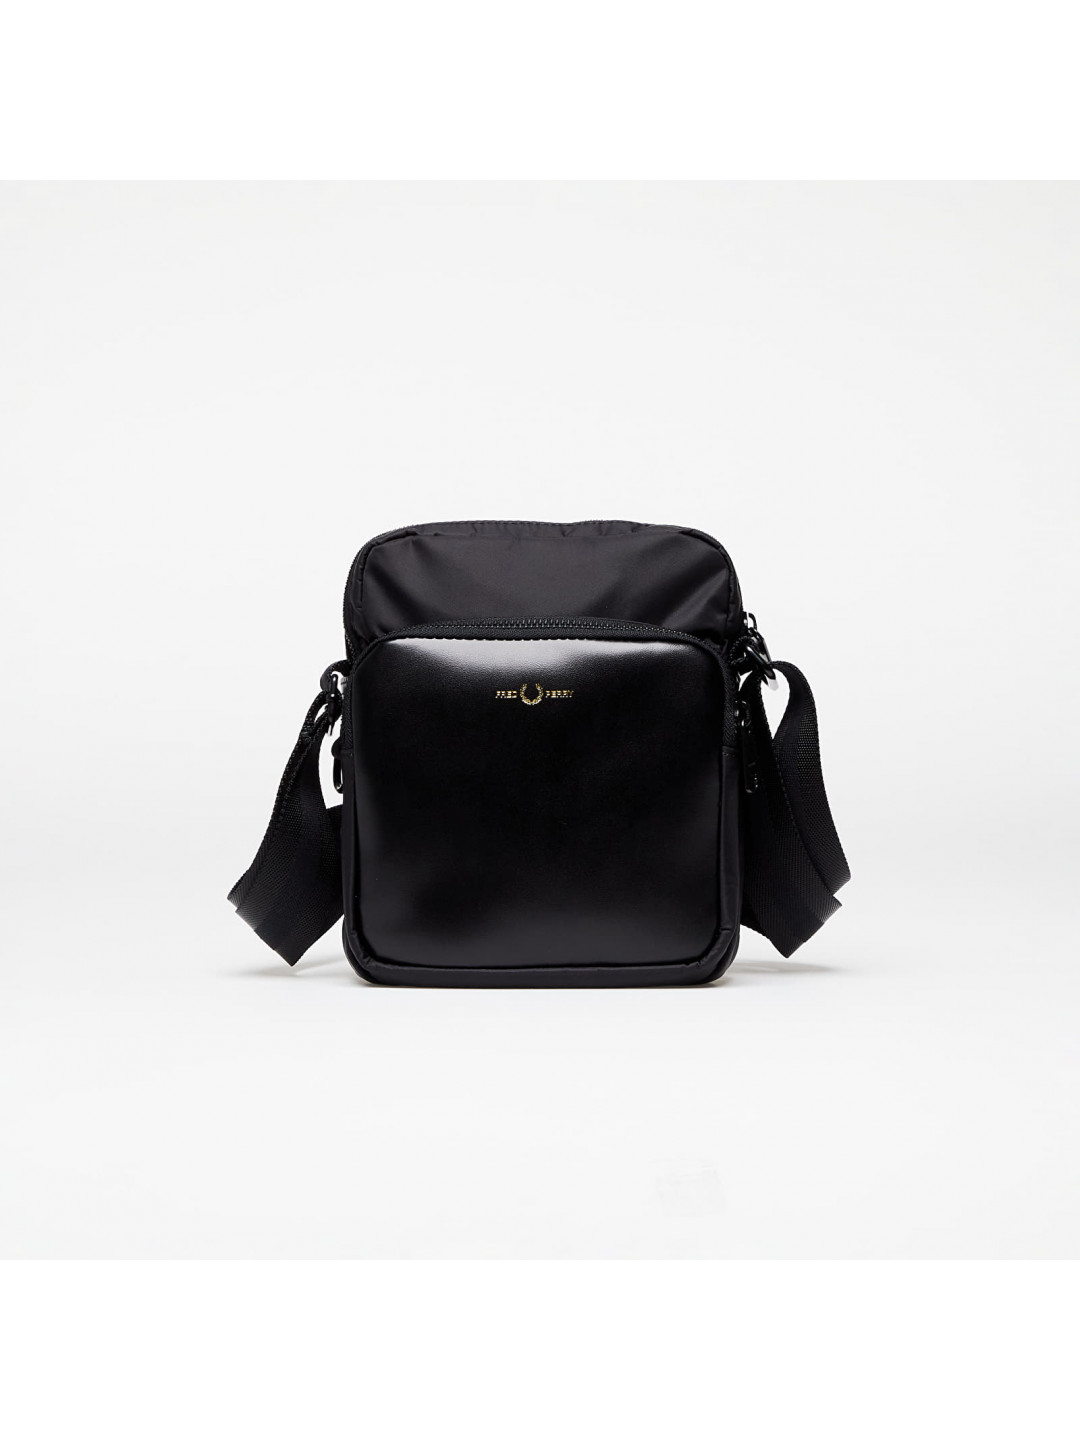 FRED PERRY Nylon Twill Leather Side Bag Black Gold